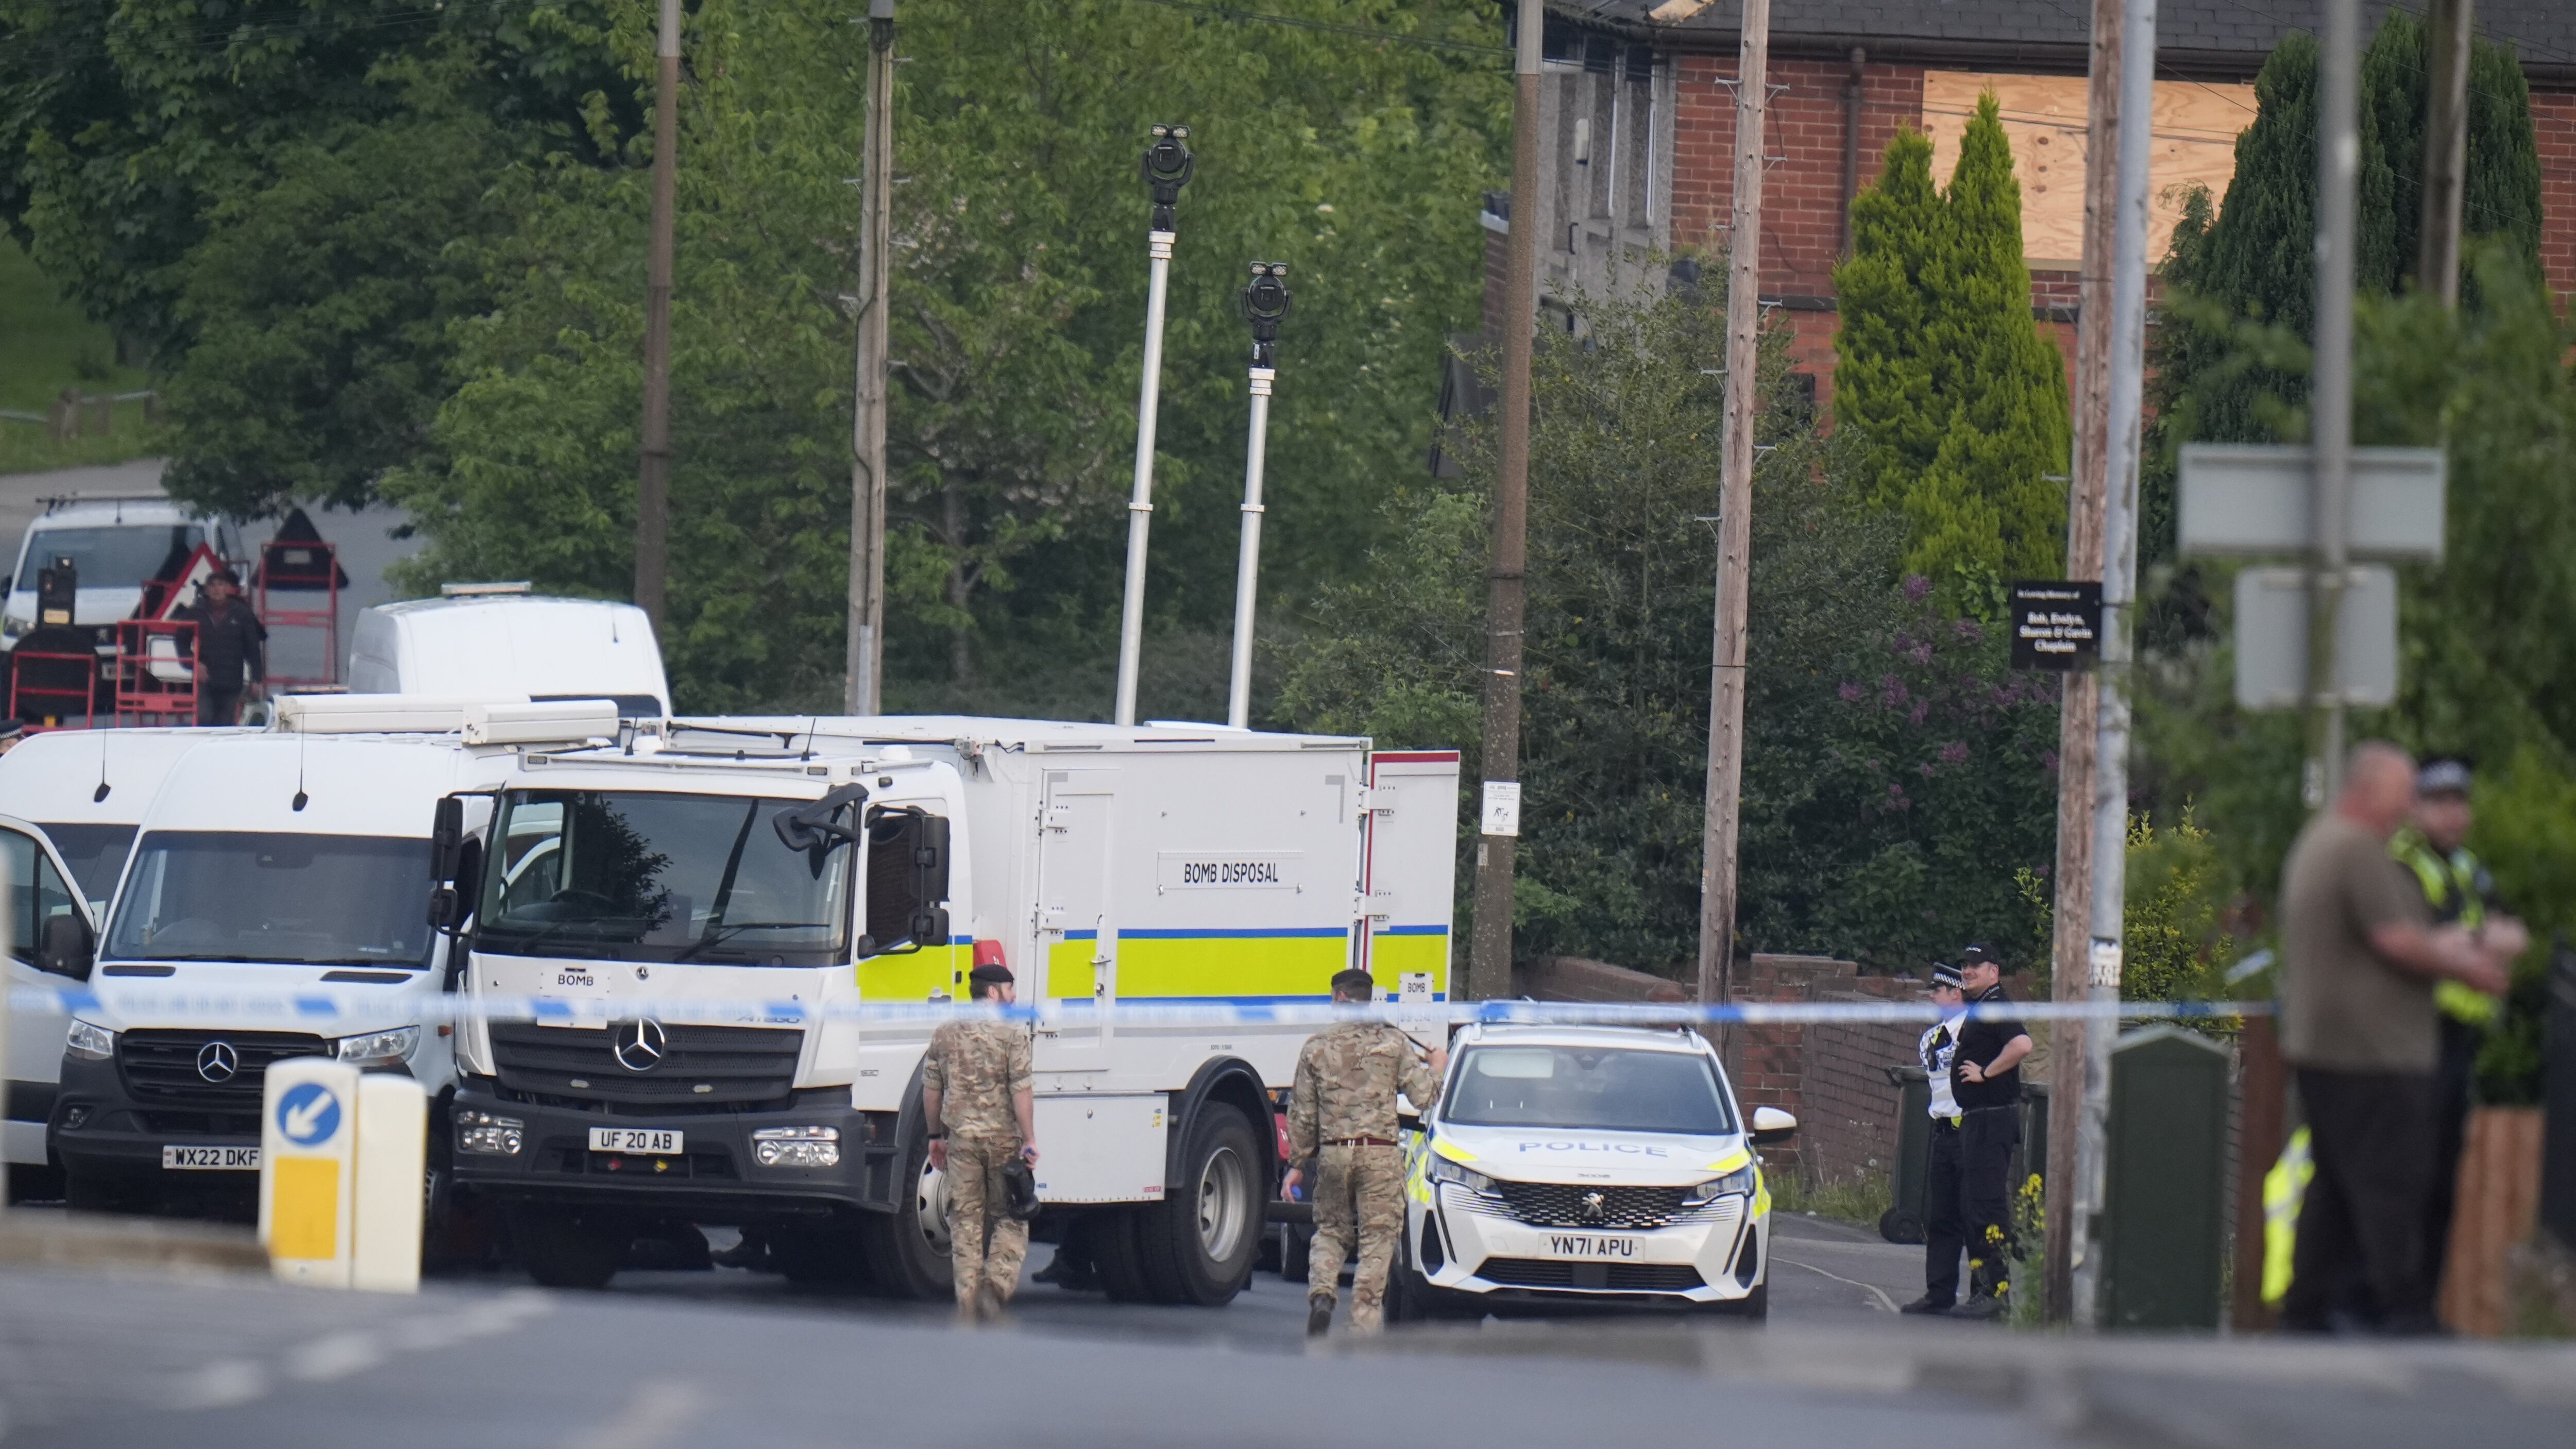 Emergency services at the scene in Grimethorpe after more than 100 homes were evacuated